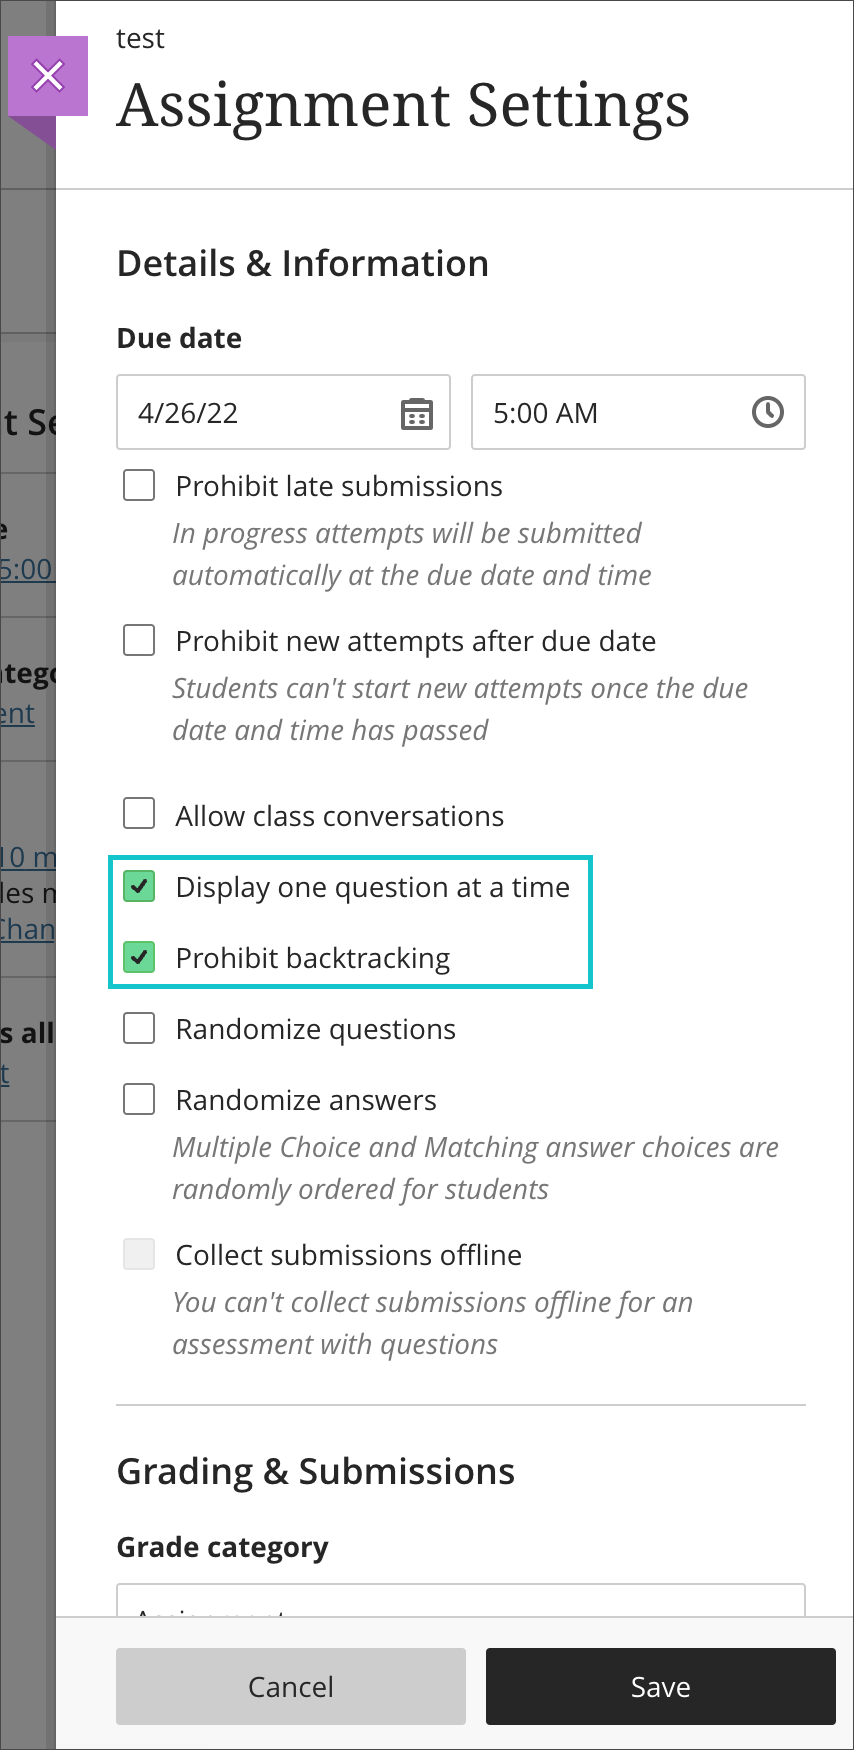 Assessment Settings panel with prohibit backtracking